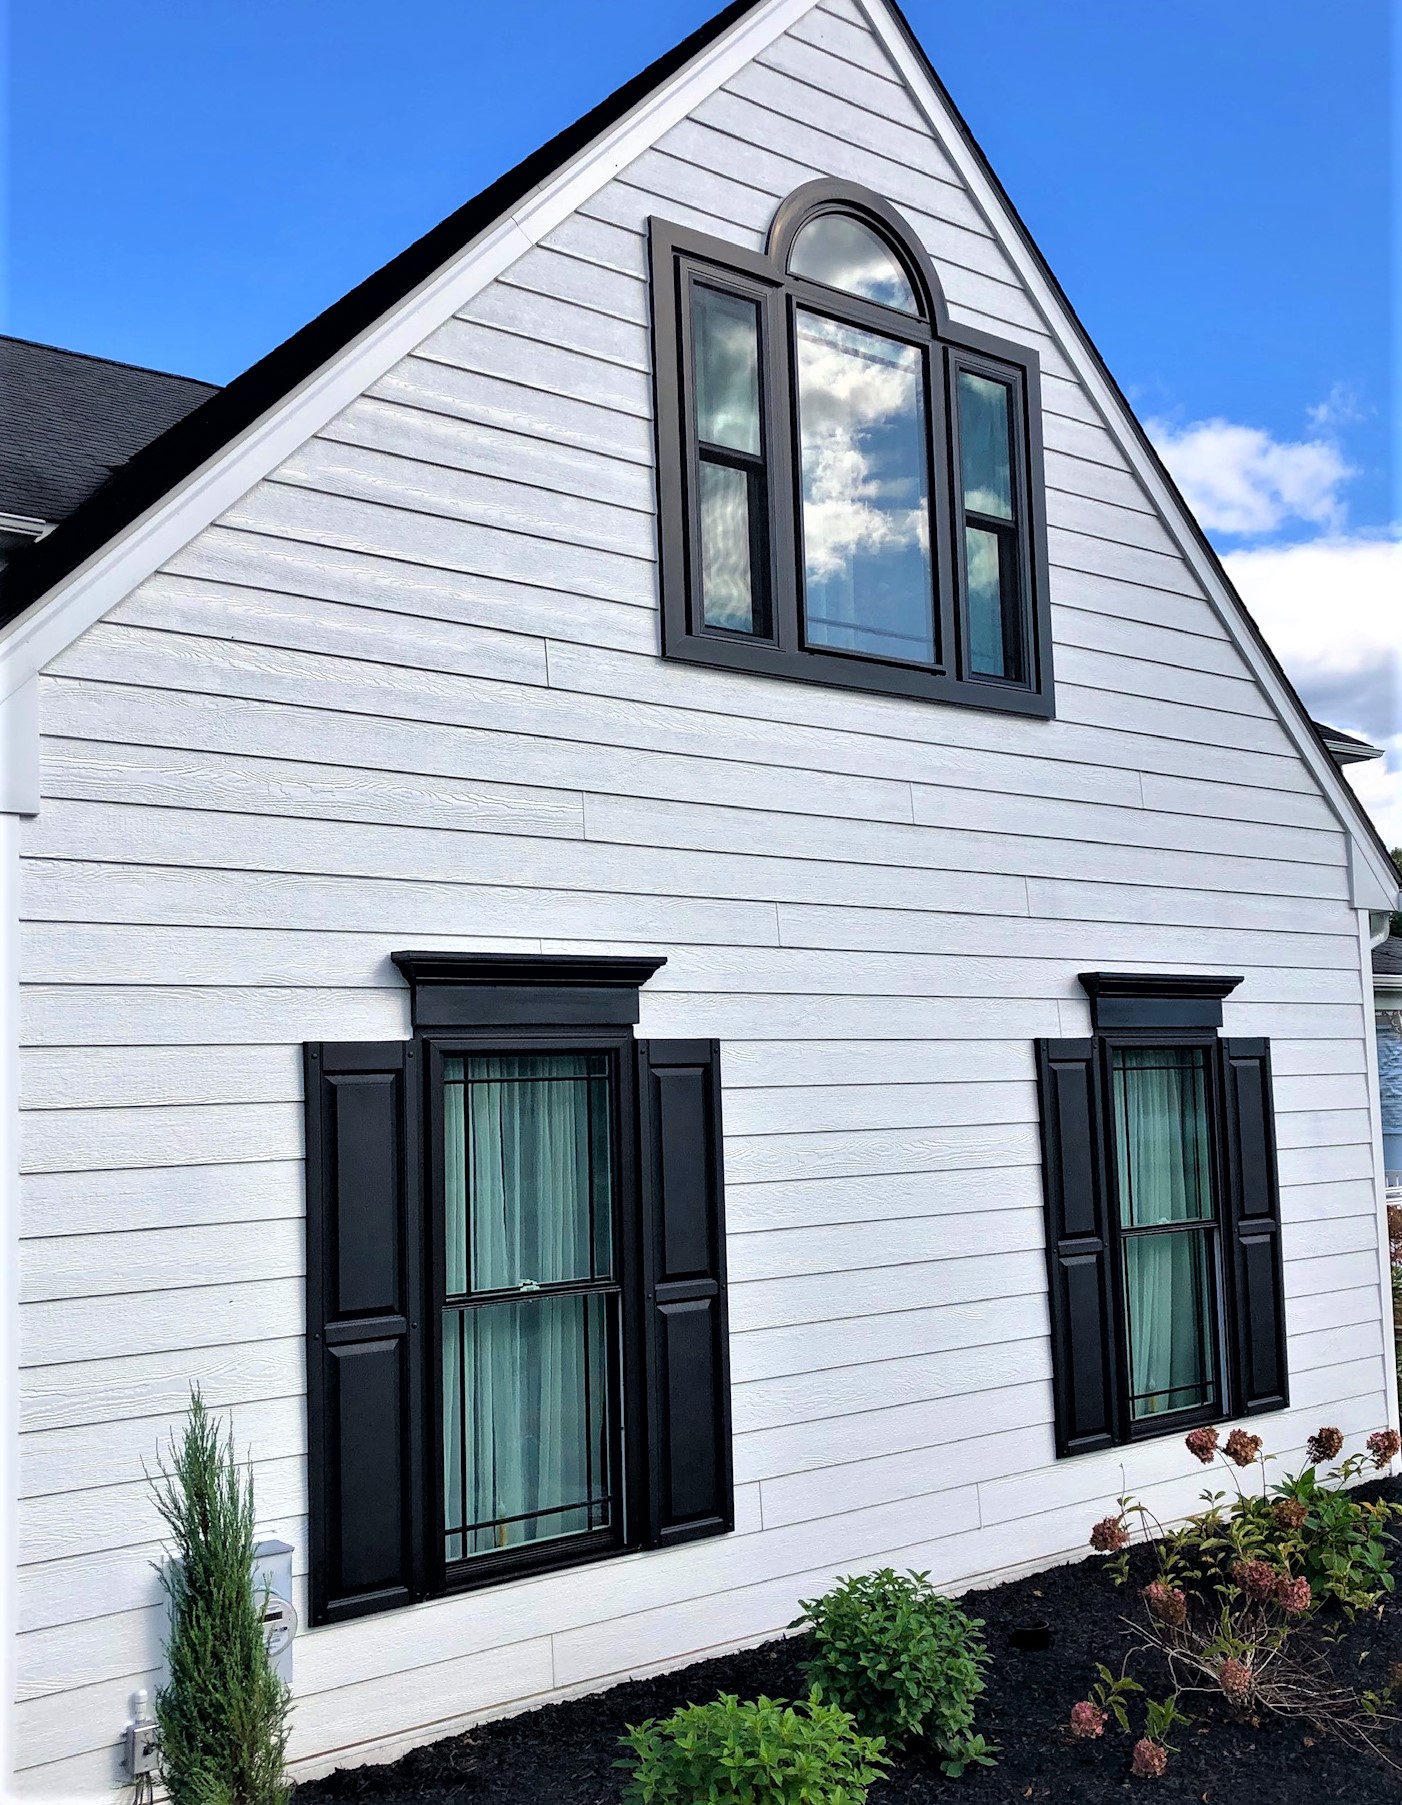 Side view of house with white siding and black windows with black shutters